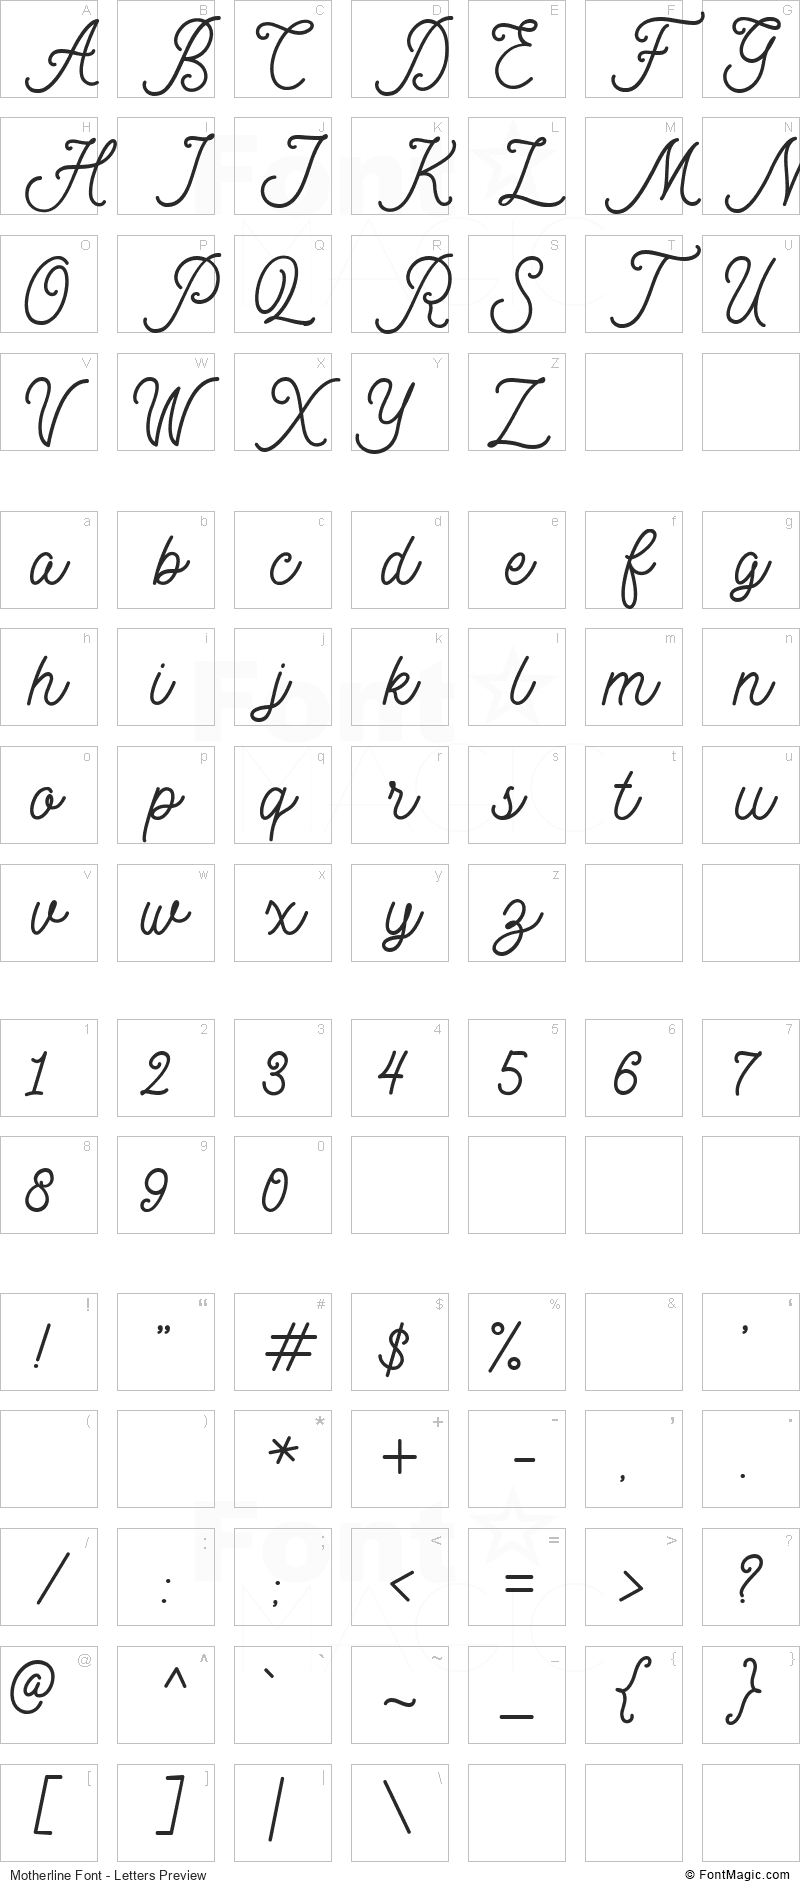 Motherline Font - All Latters Preview Chart